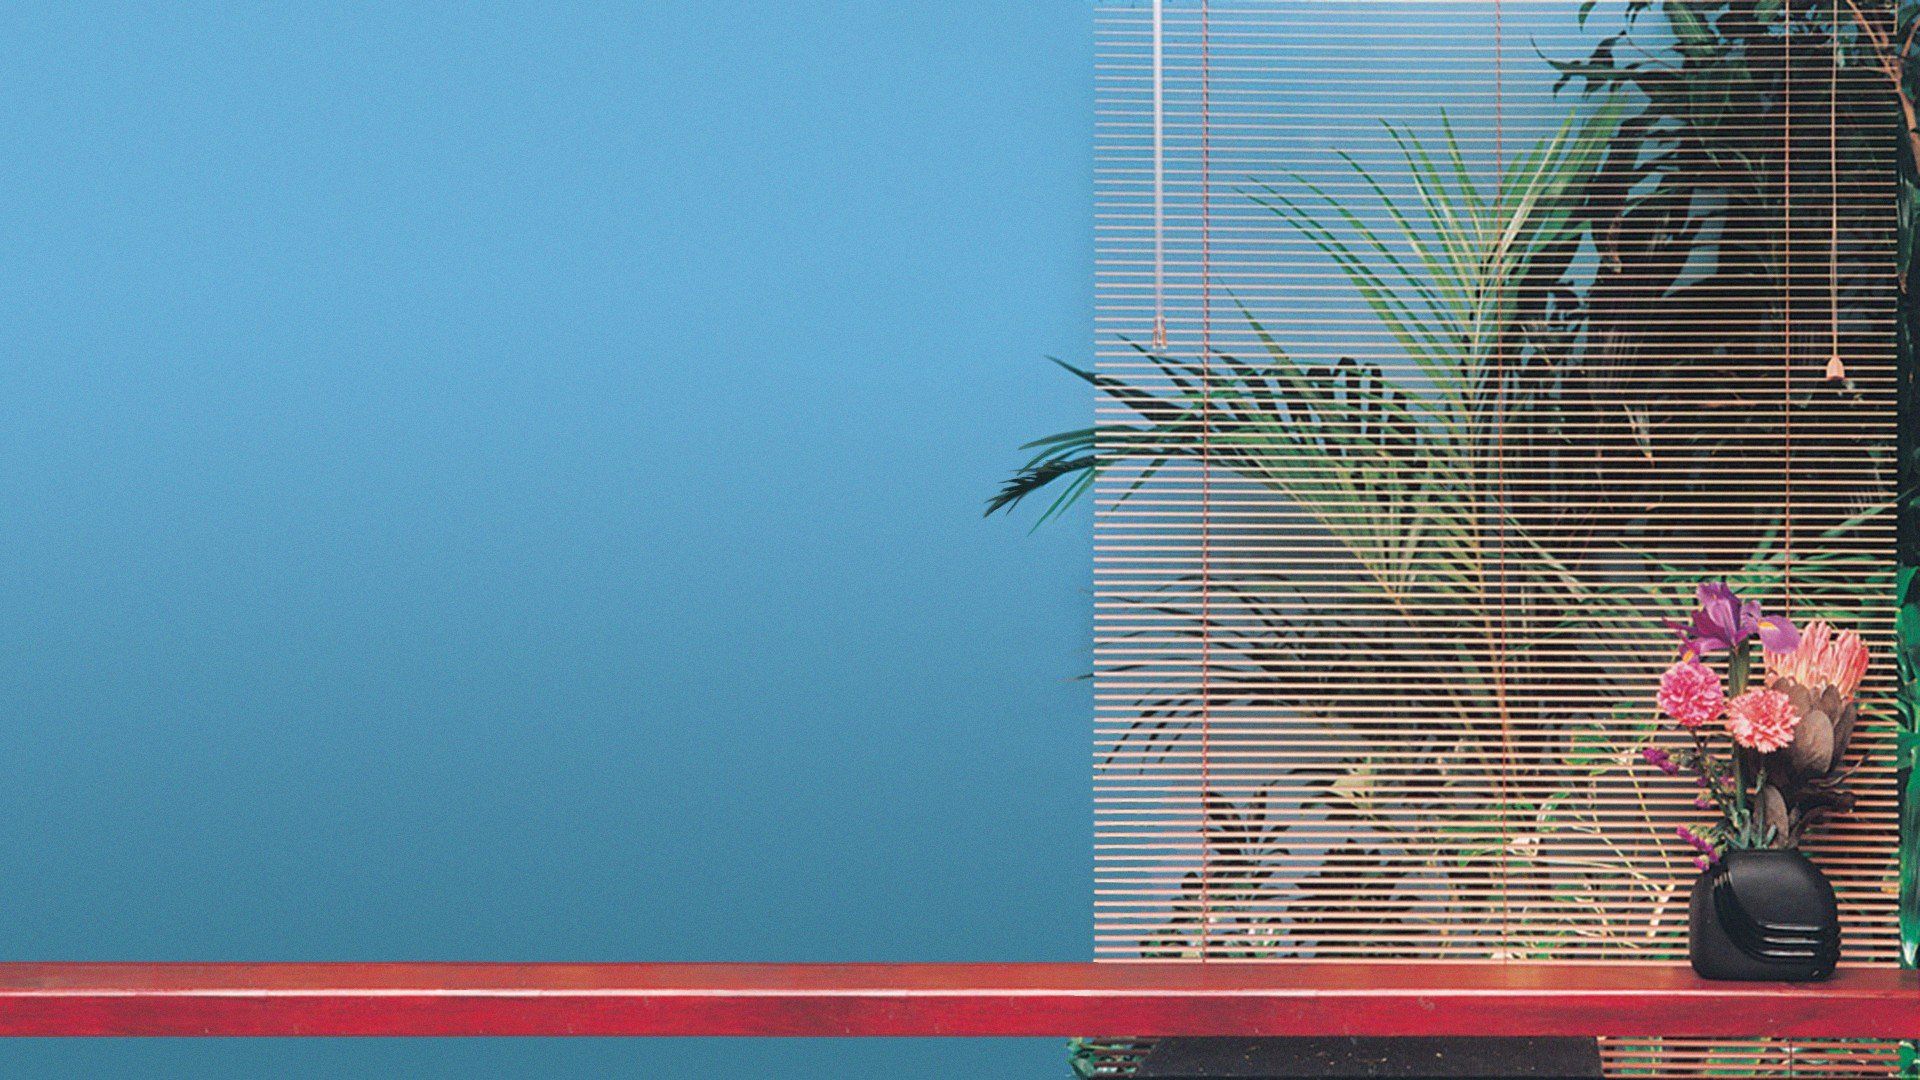 A vase of flowers sitting on a red table in front of a window. - Vaporwave, 1920x1080, architecture, Windows 95